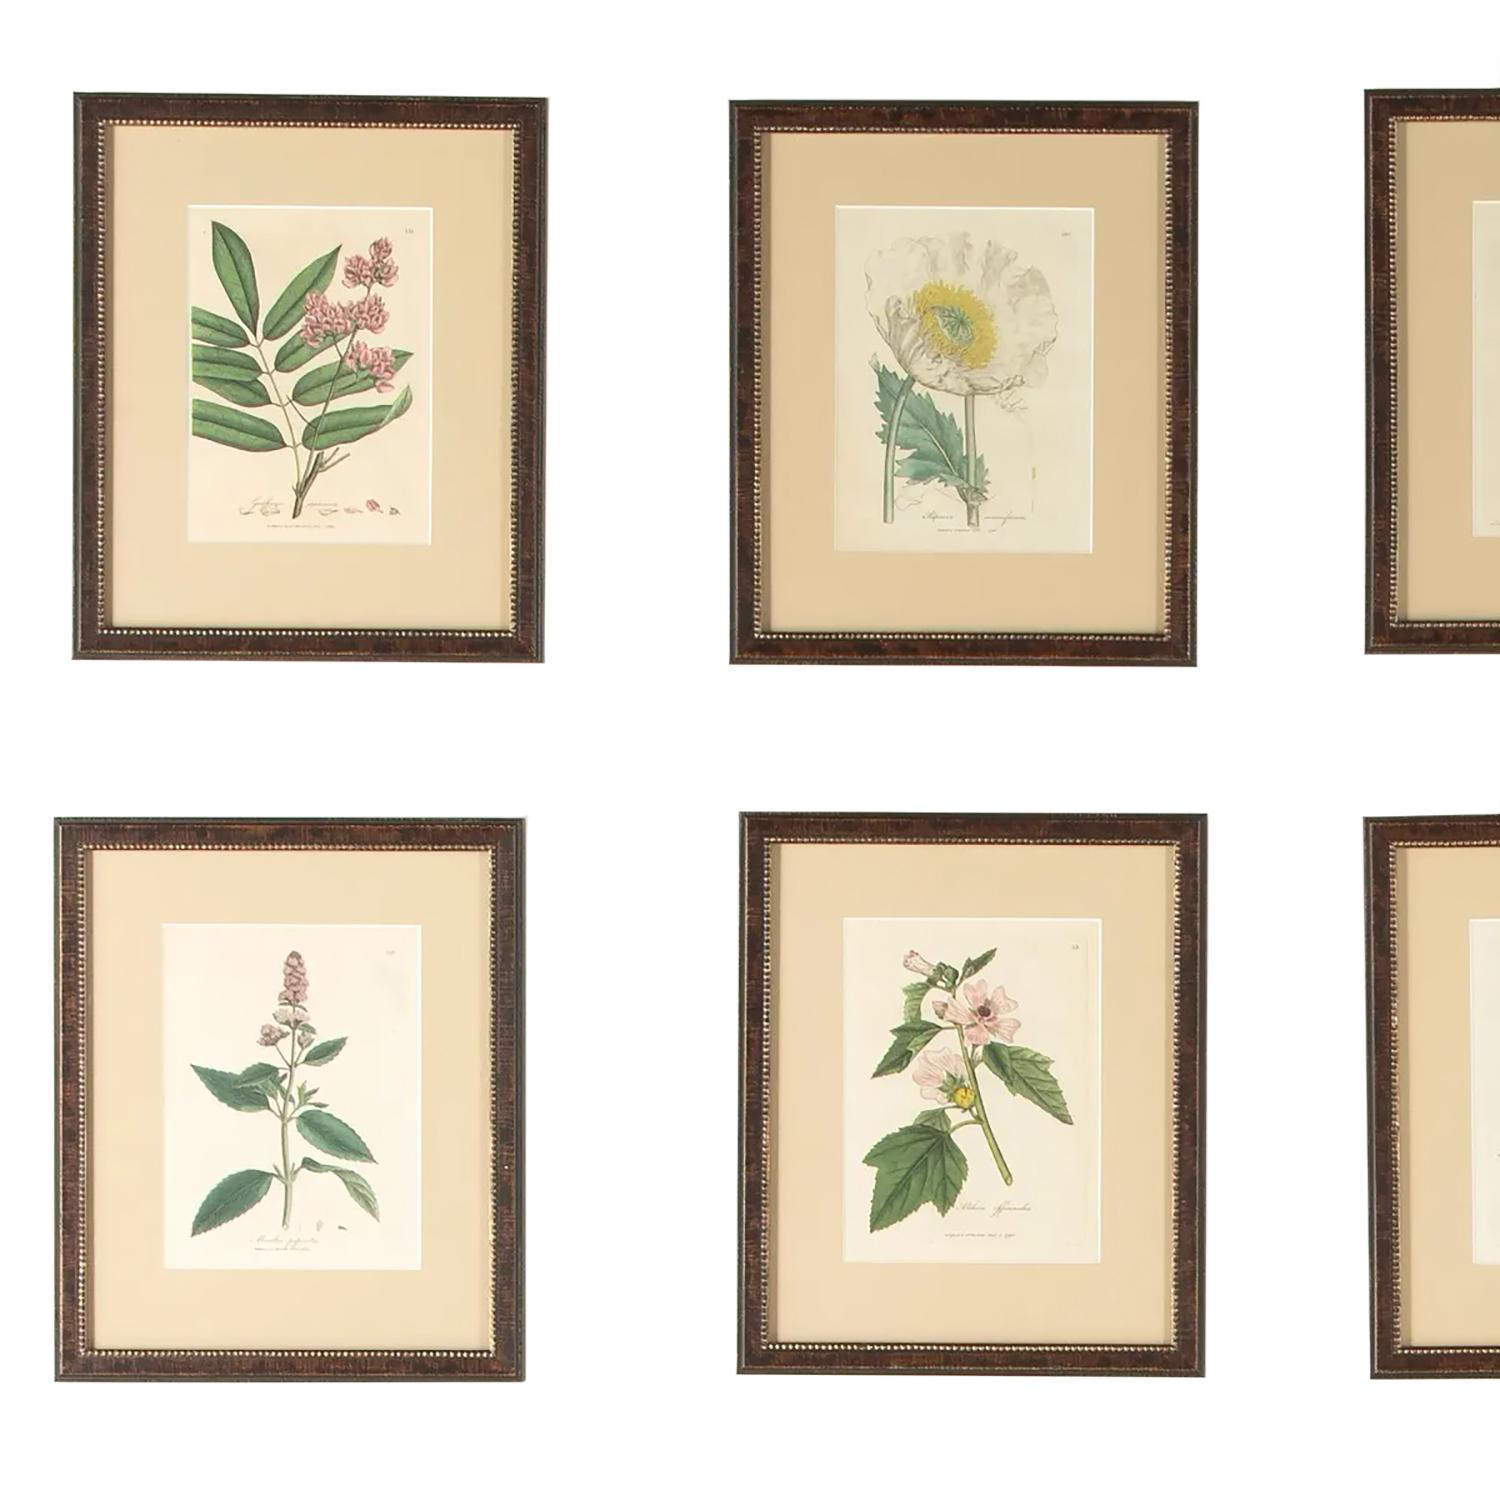 A set of 12 hand colored botanical engravings from the rare first edition, published from 1790-1795, of the “Medical Botany, Containing Systematic and General Descriptions, with Plates, of all the Medicinal Plants, Indigenous and Exotic,